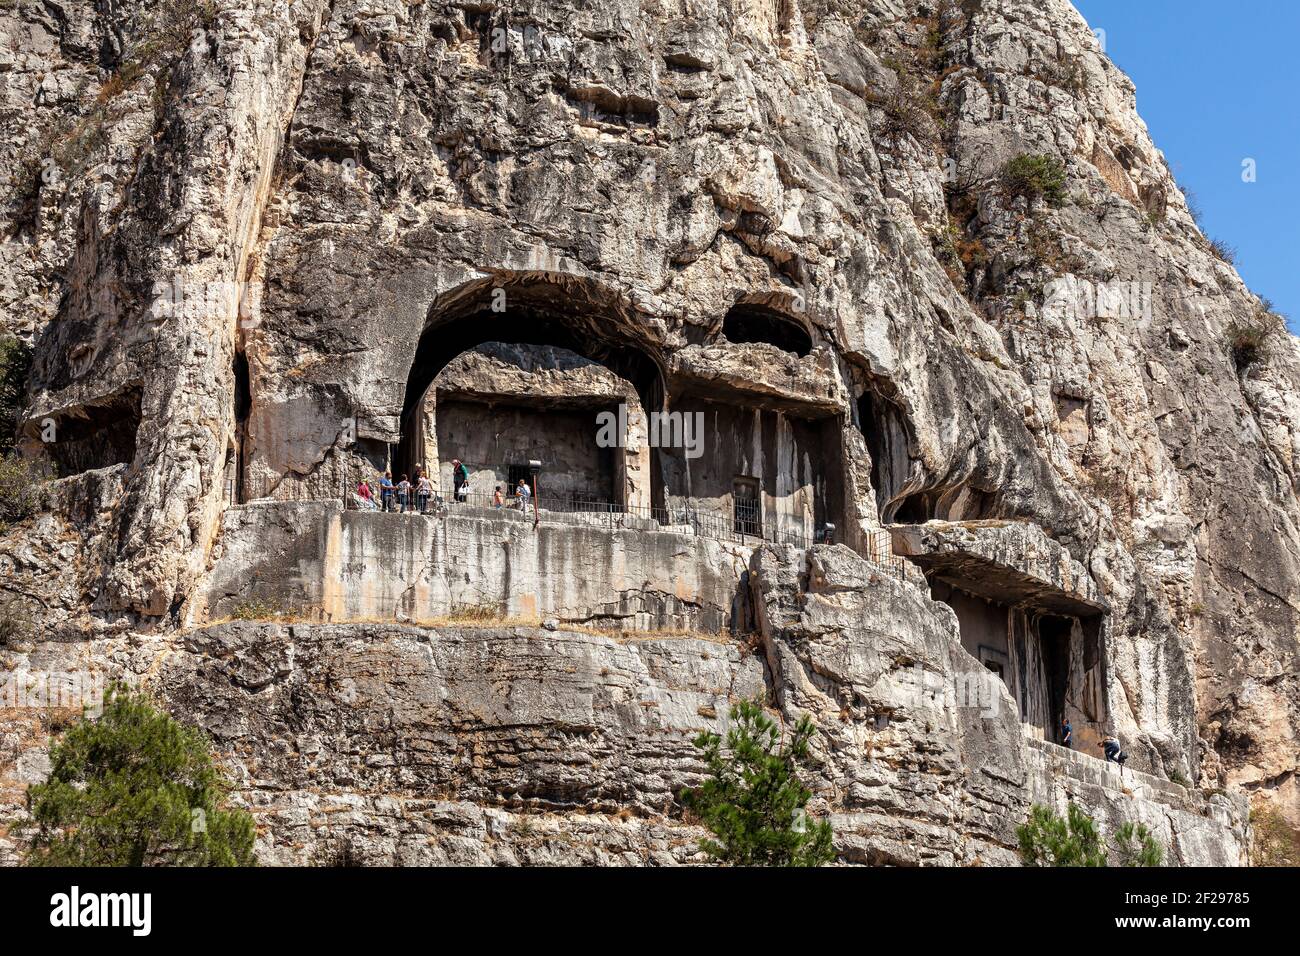 Amasya, Turkey - 09.03.2013: Amasya is a city in northern Turkey, detail view of king rock tombs. Stock Photo